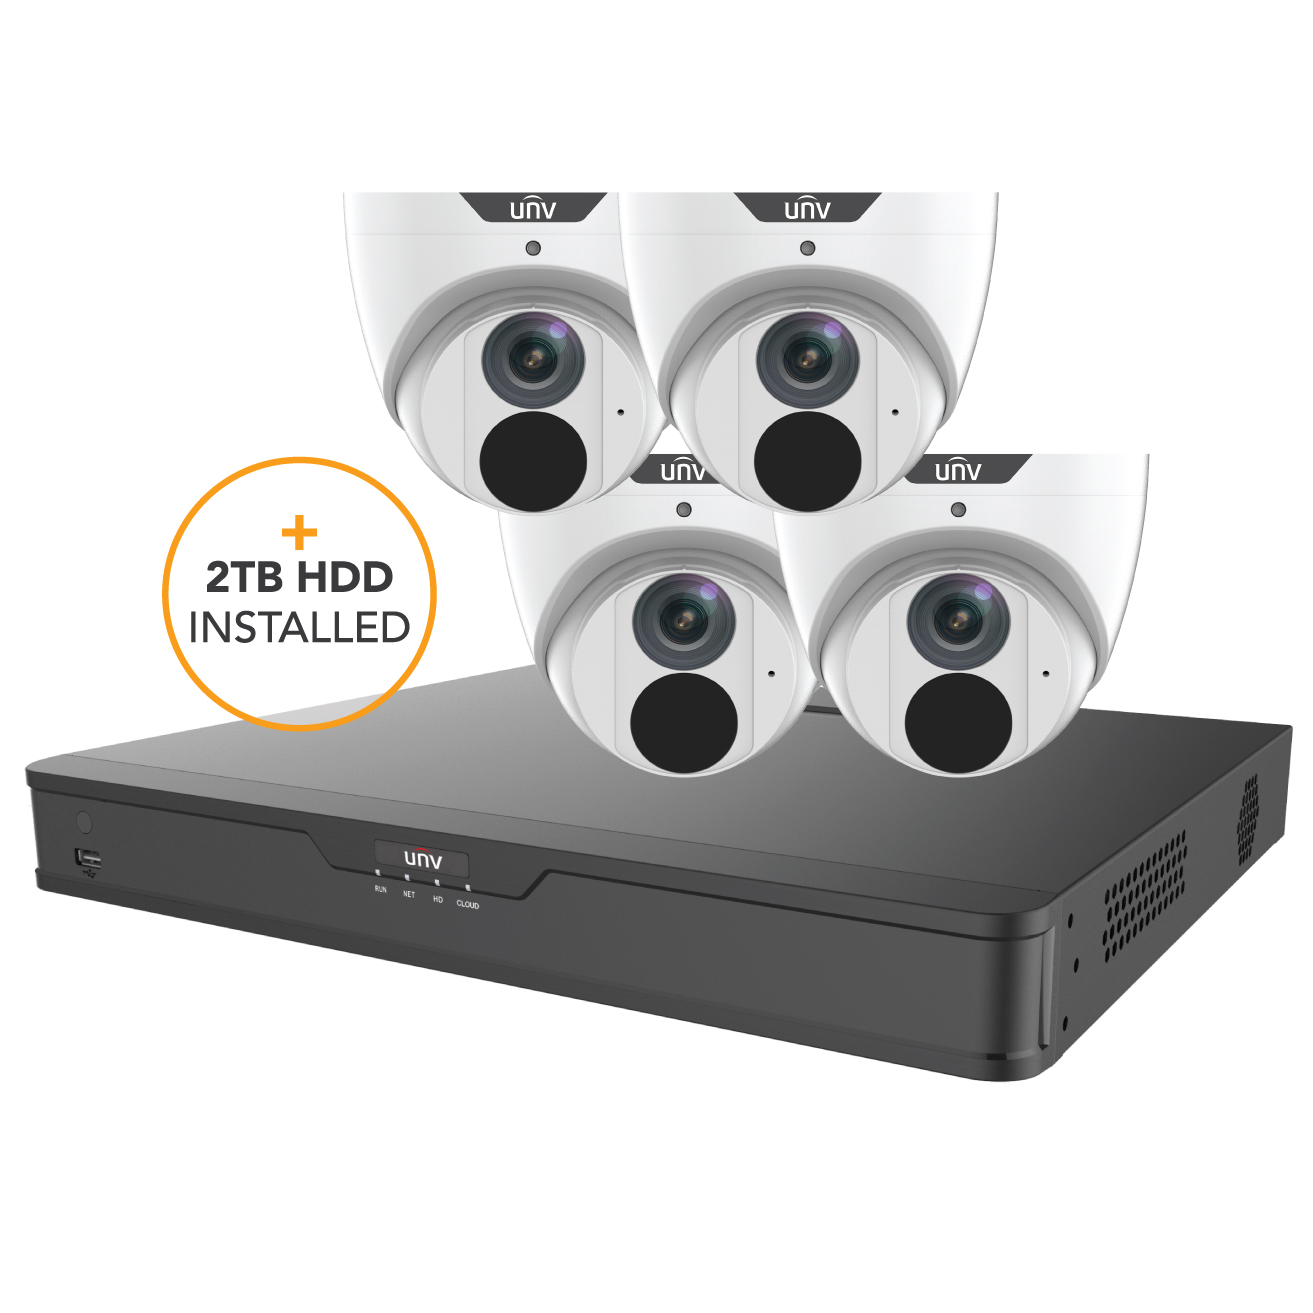 UNIVIEW EASY STARTER KIT INCLUDES 4 x 6MP WHITE EASYSTAR TURRET CAMERAS 2.8MM & 8 CHANNEL BLACK NVR EXPANDABLE HDD WITH 2TB HDD LOADED